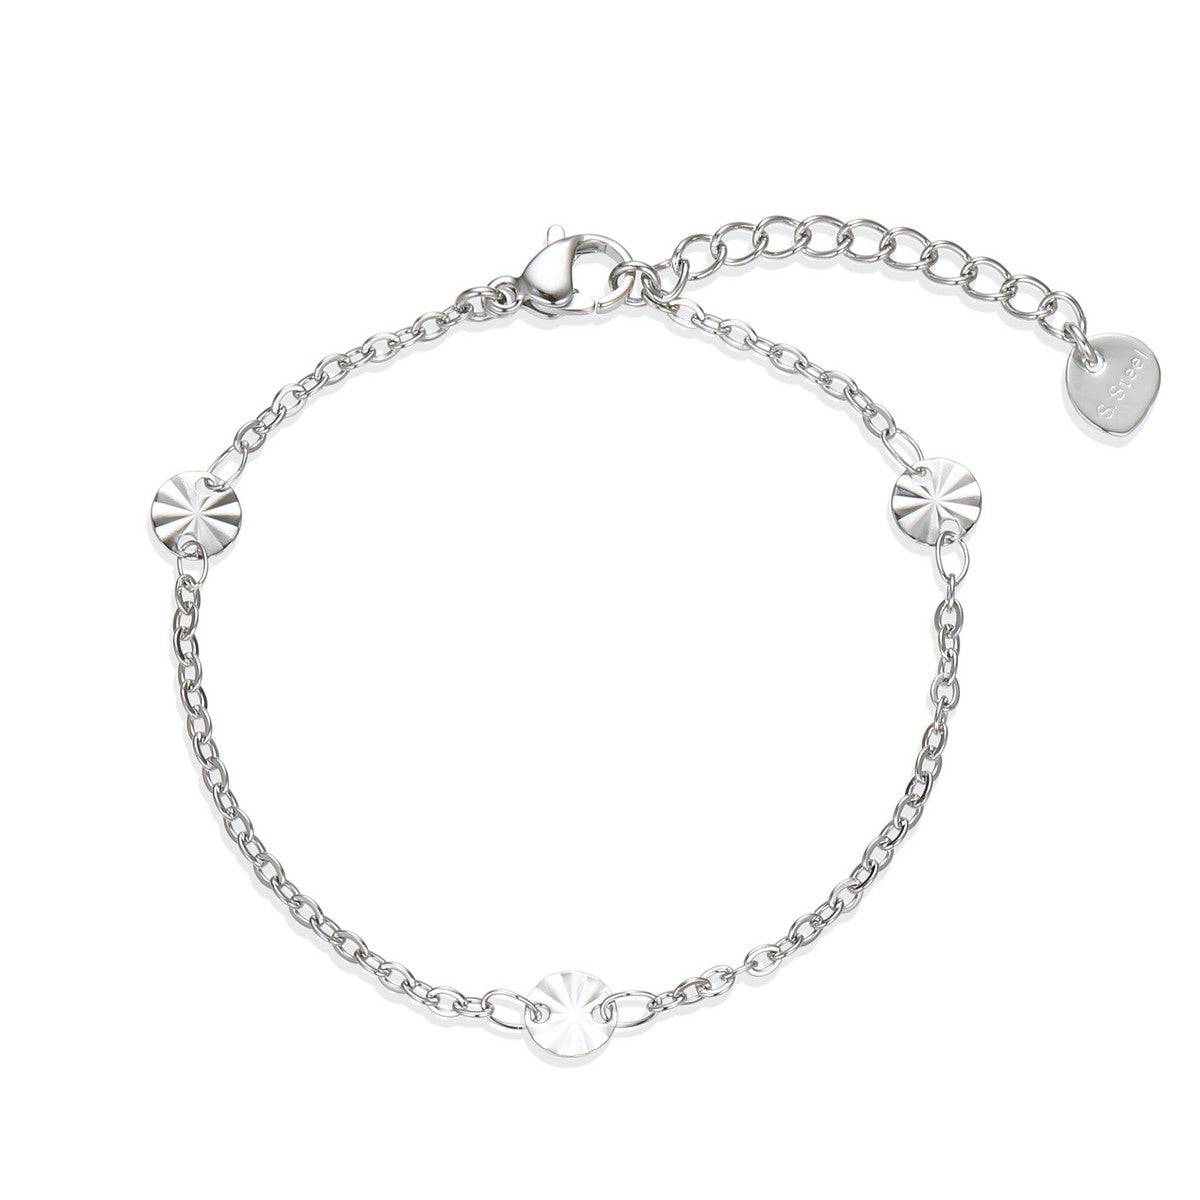 Minimalist Silver Bracelet with Disk Accents YD12903SLR